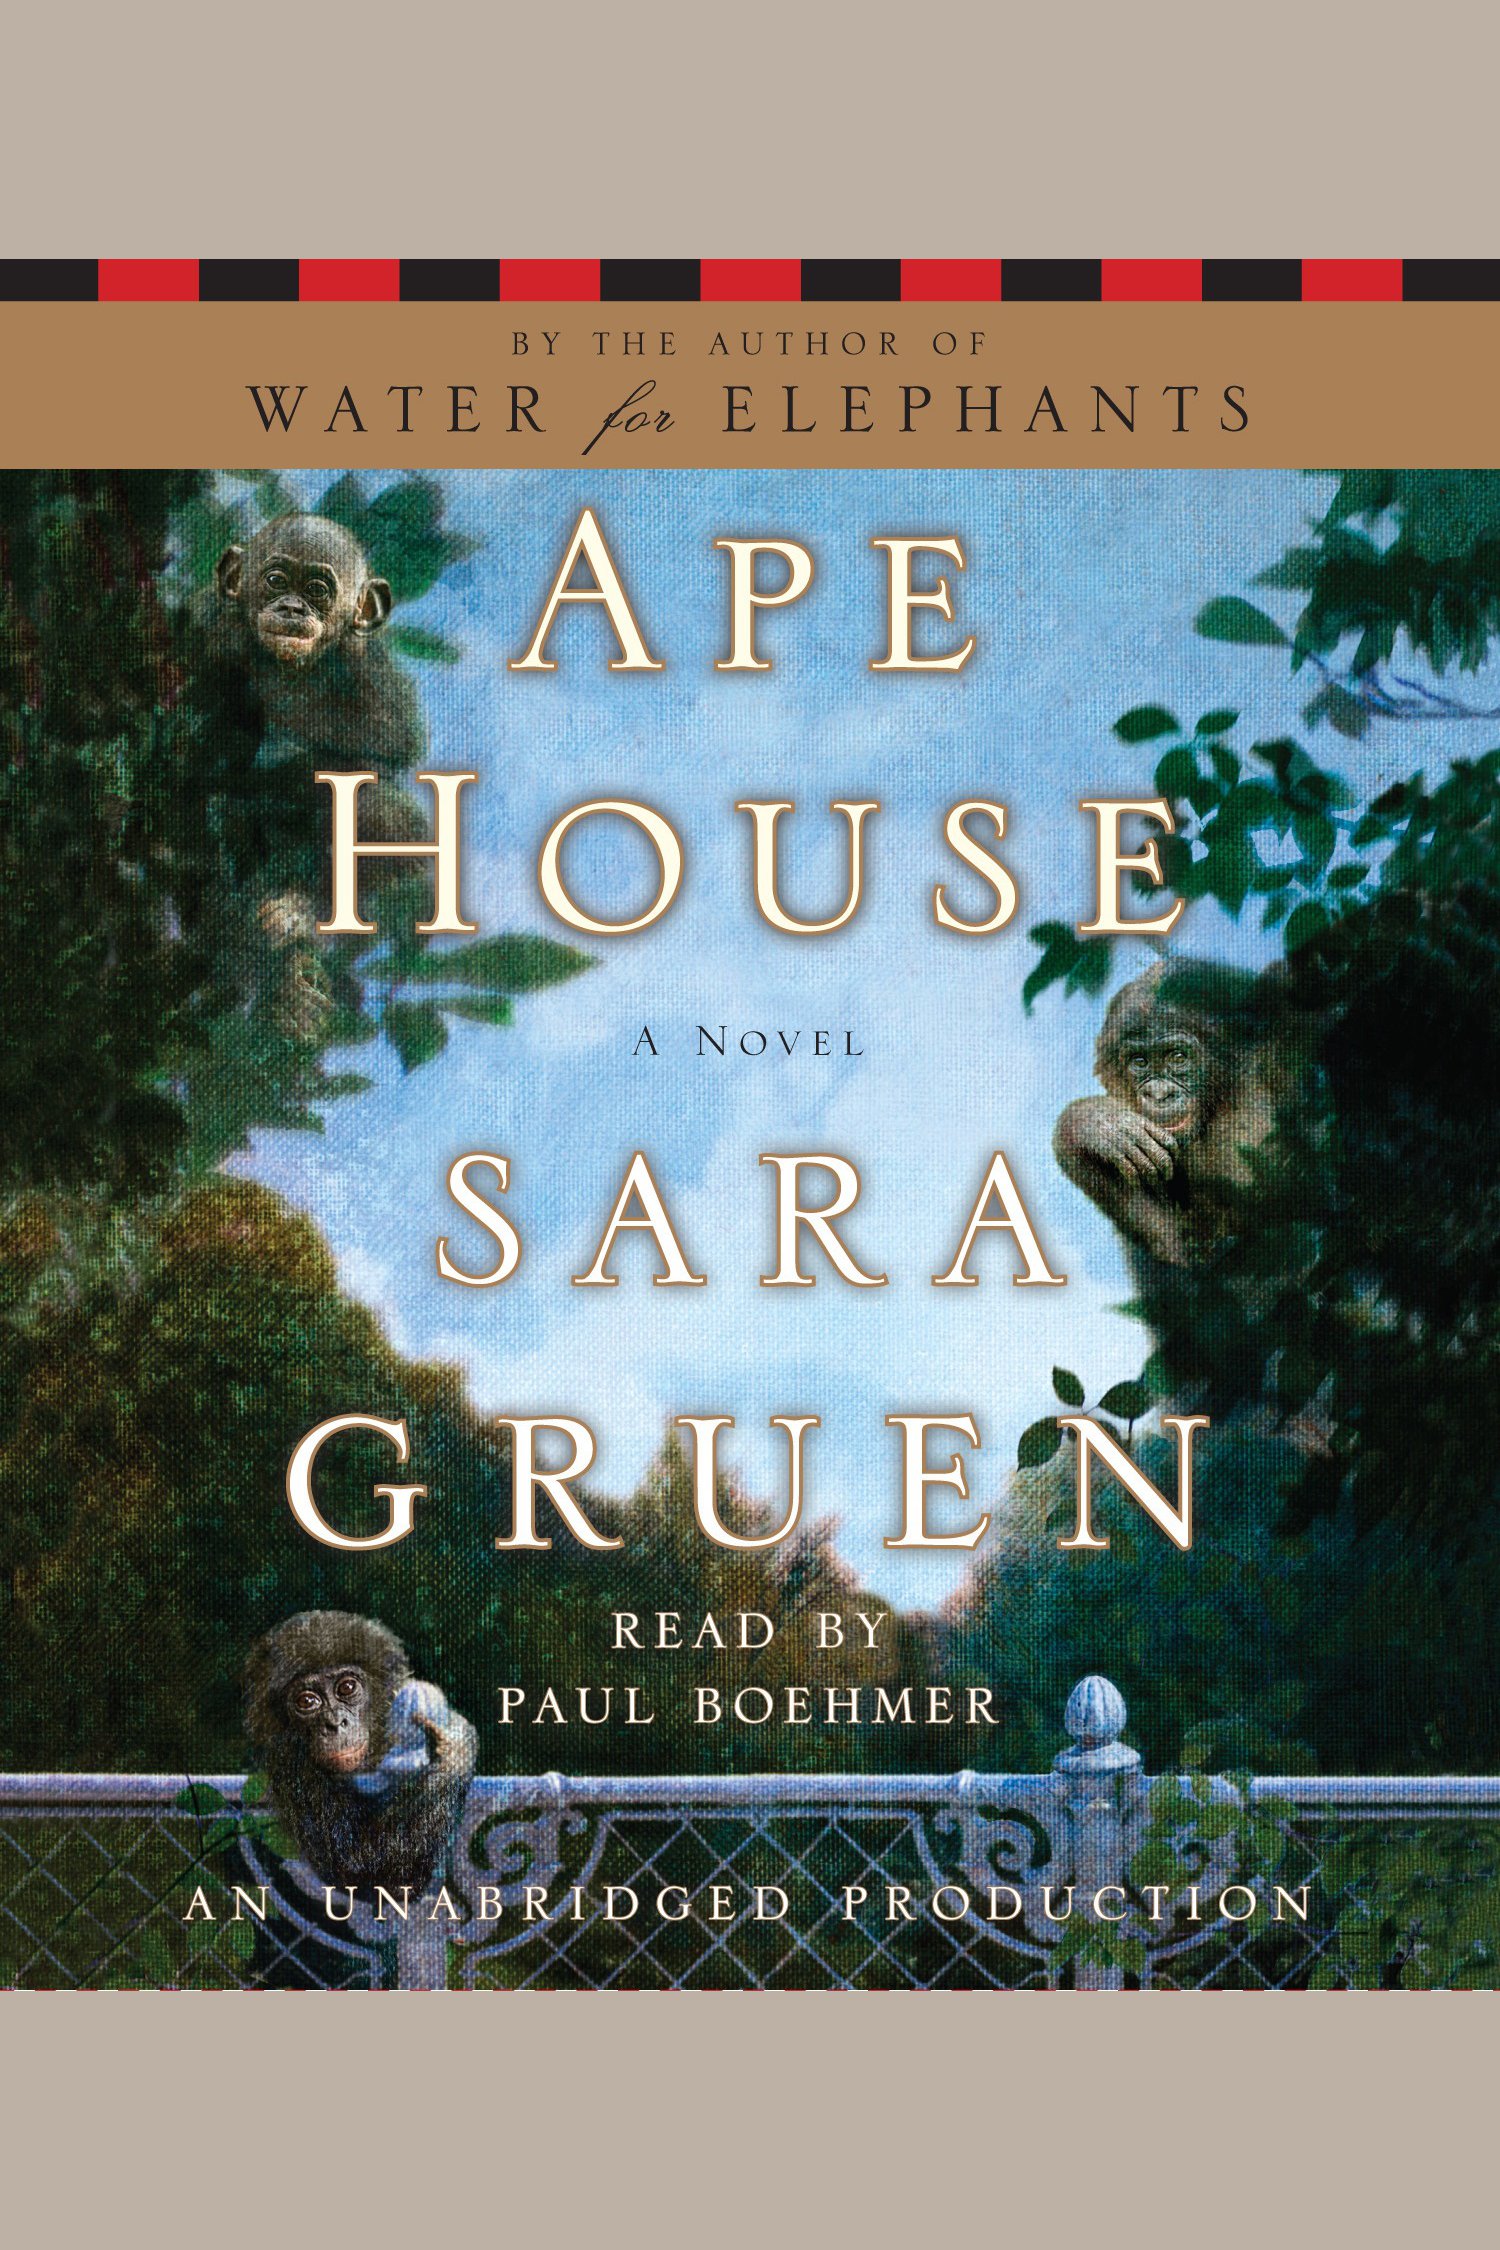 Ape house cover image